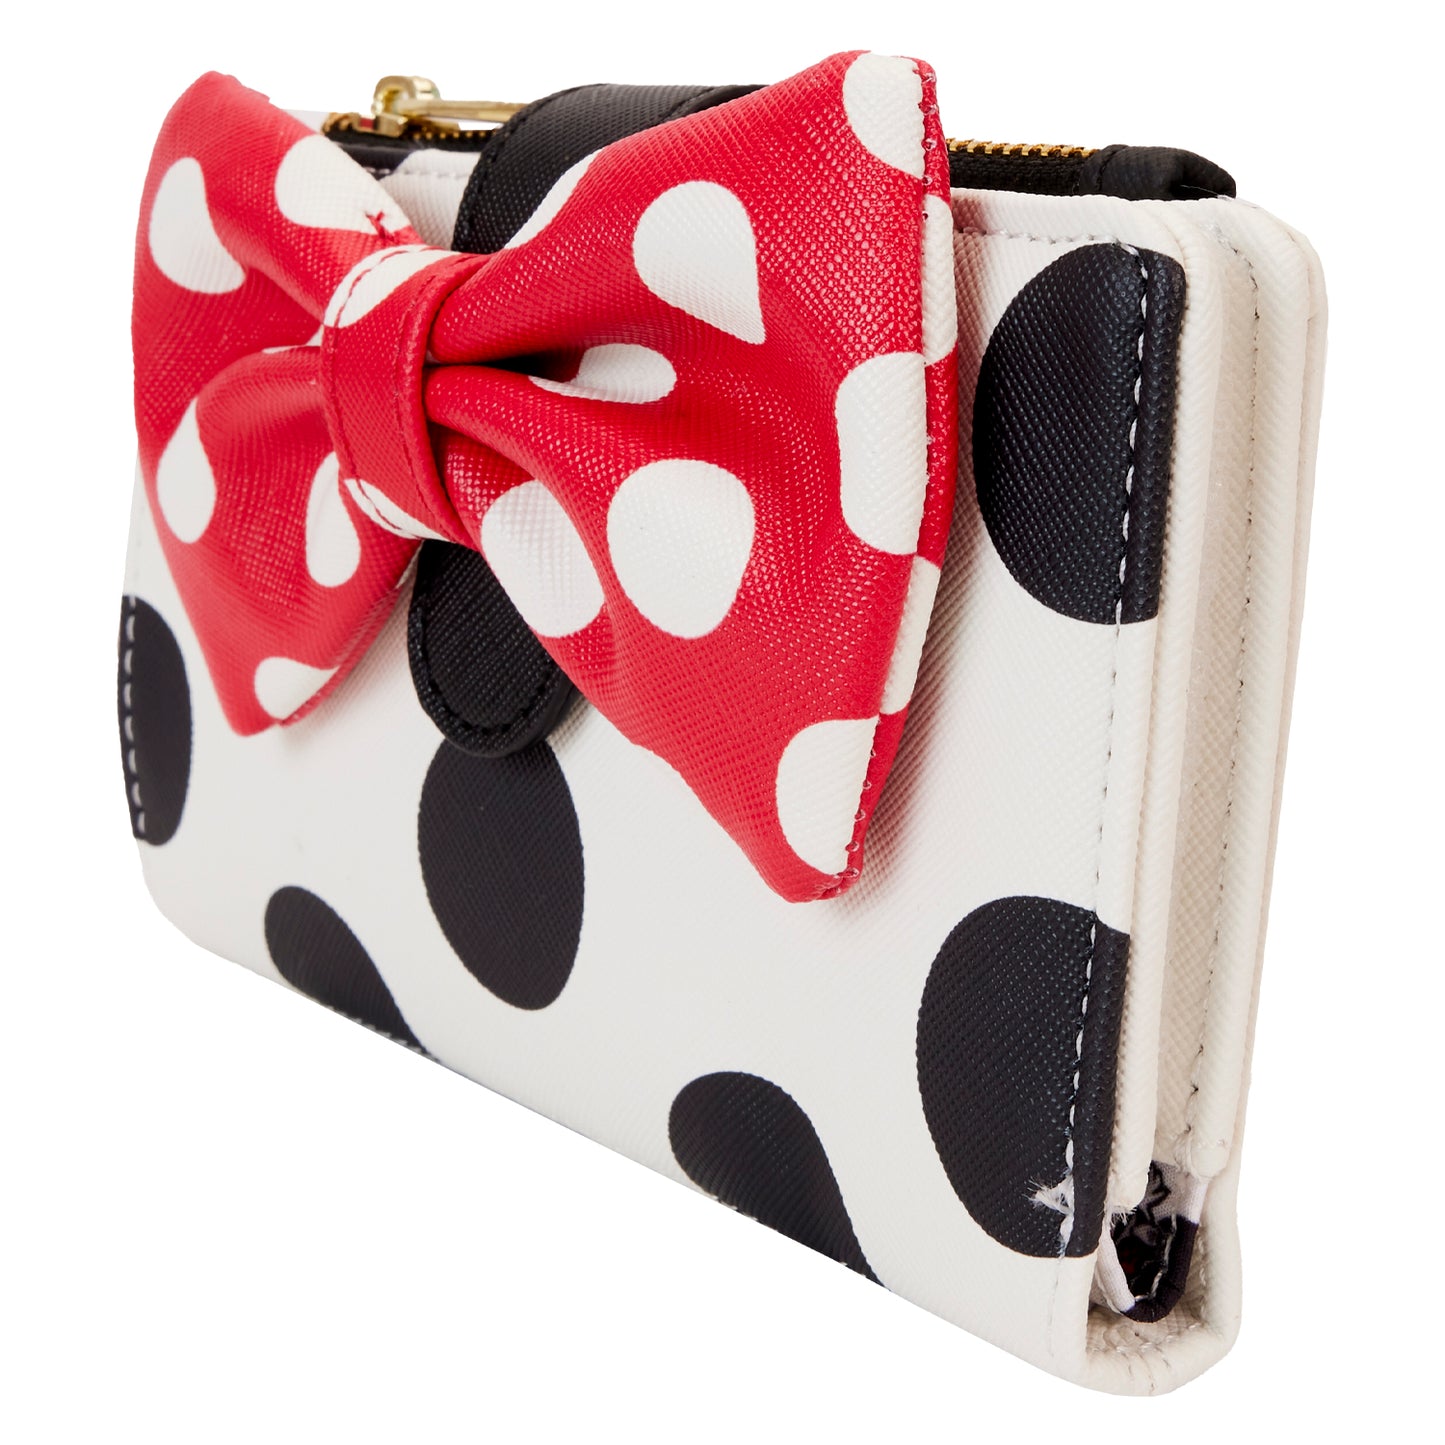 Minnie Mouse Rocks the Dots Classic Flap Wallet LFY